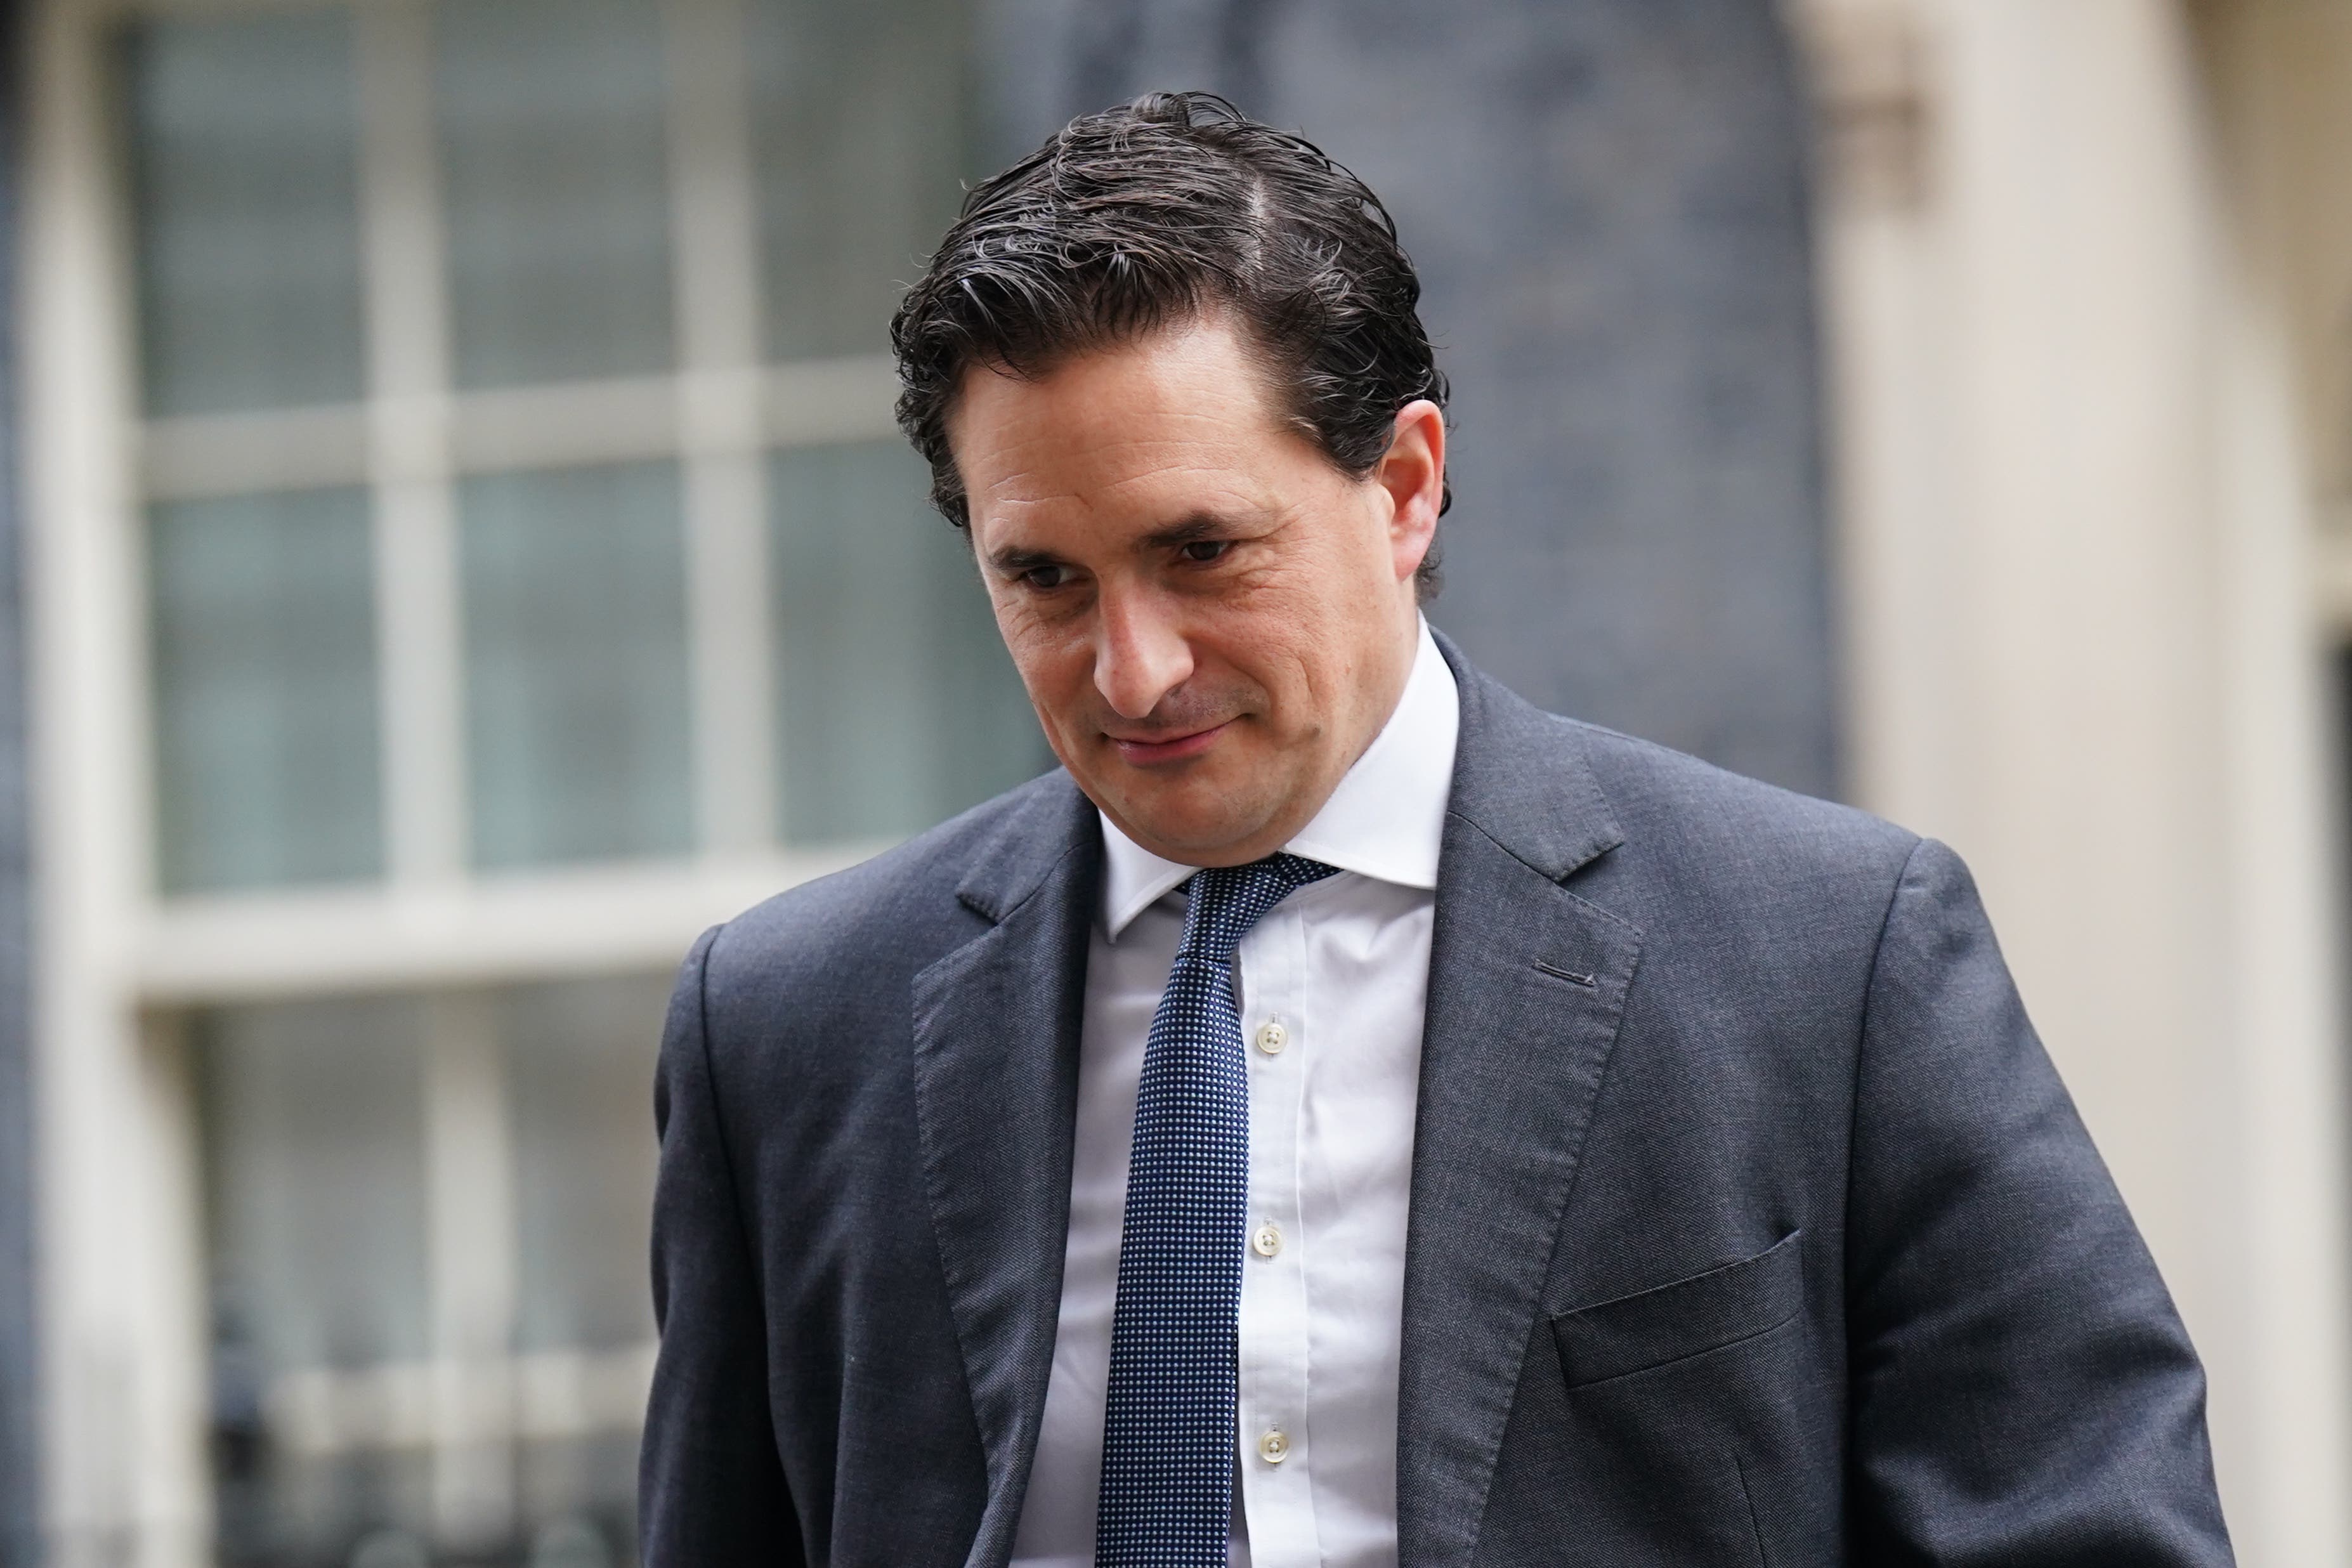 Former veterans’ minister Johnny Mercer has until 25 July to hand over the names